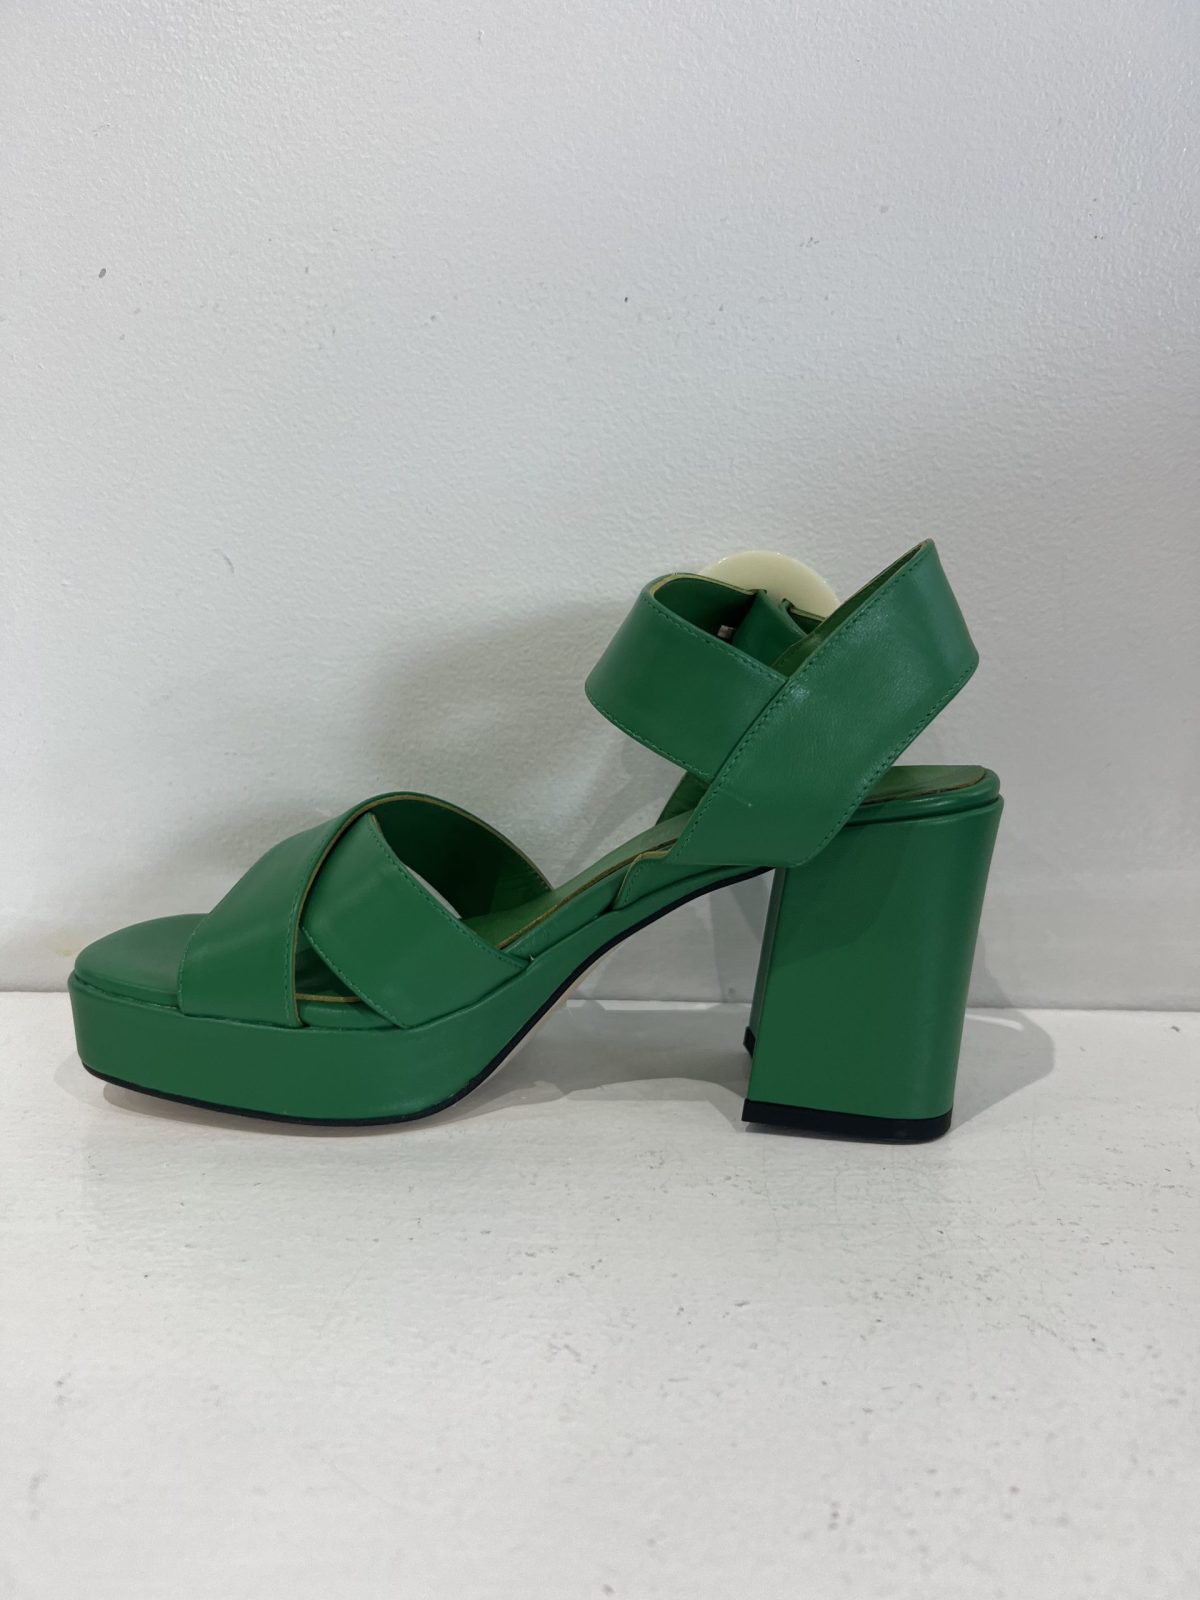 Pedro Anton 57701 V23 Green Leather Block Heel Wedge | Ooh Ooh Shoes women's clothing and shoe boutique located in Naples and Mashpee